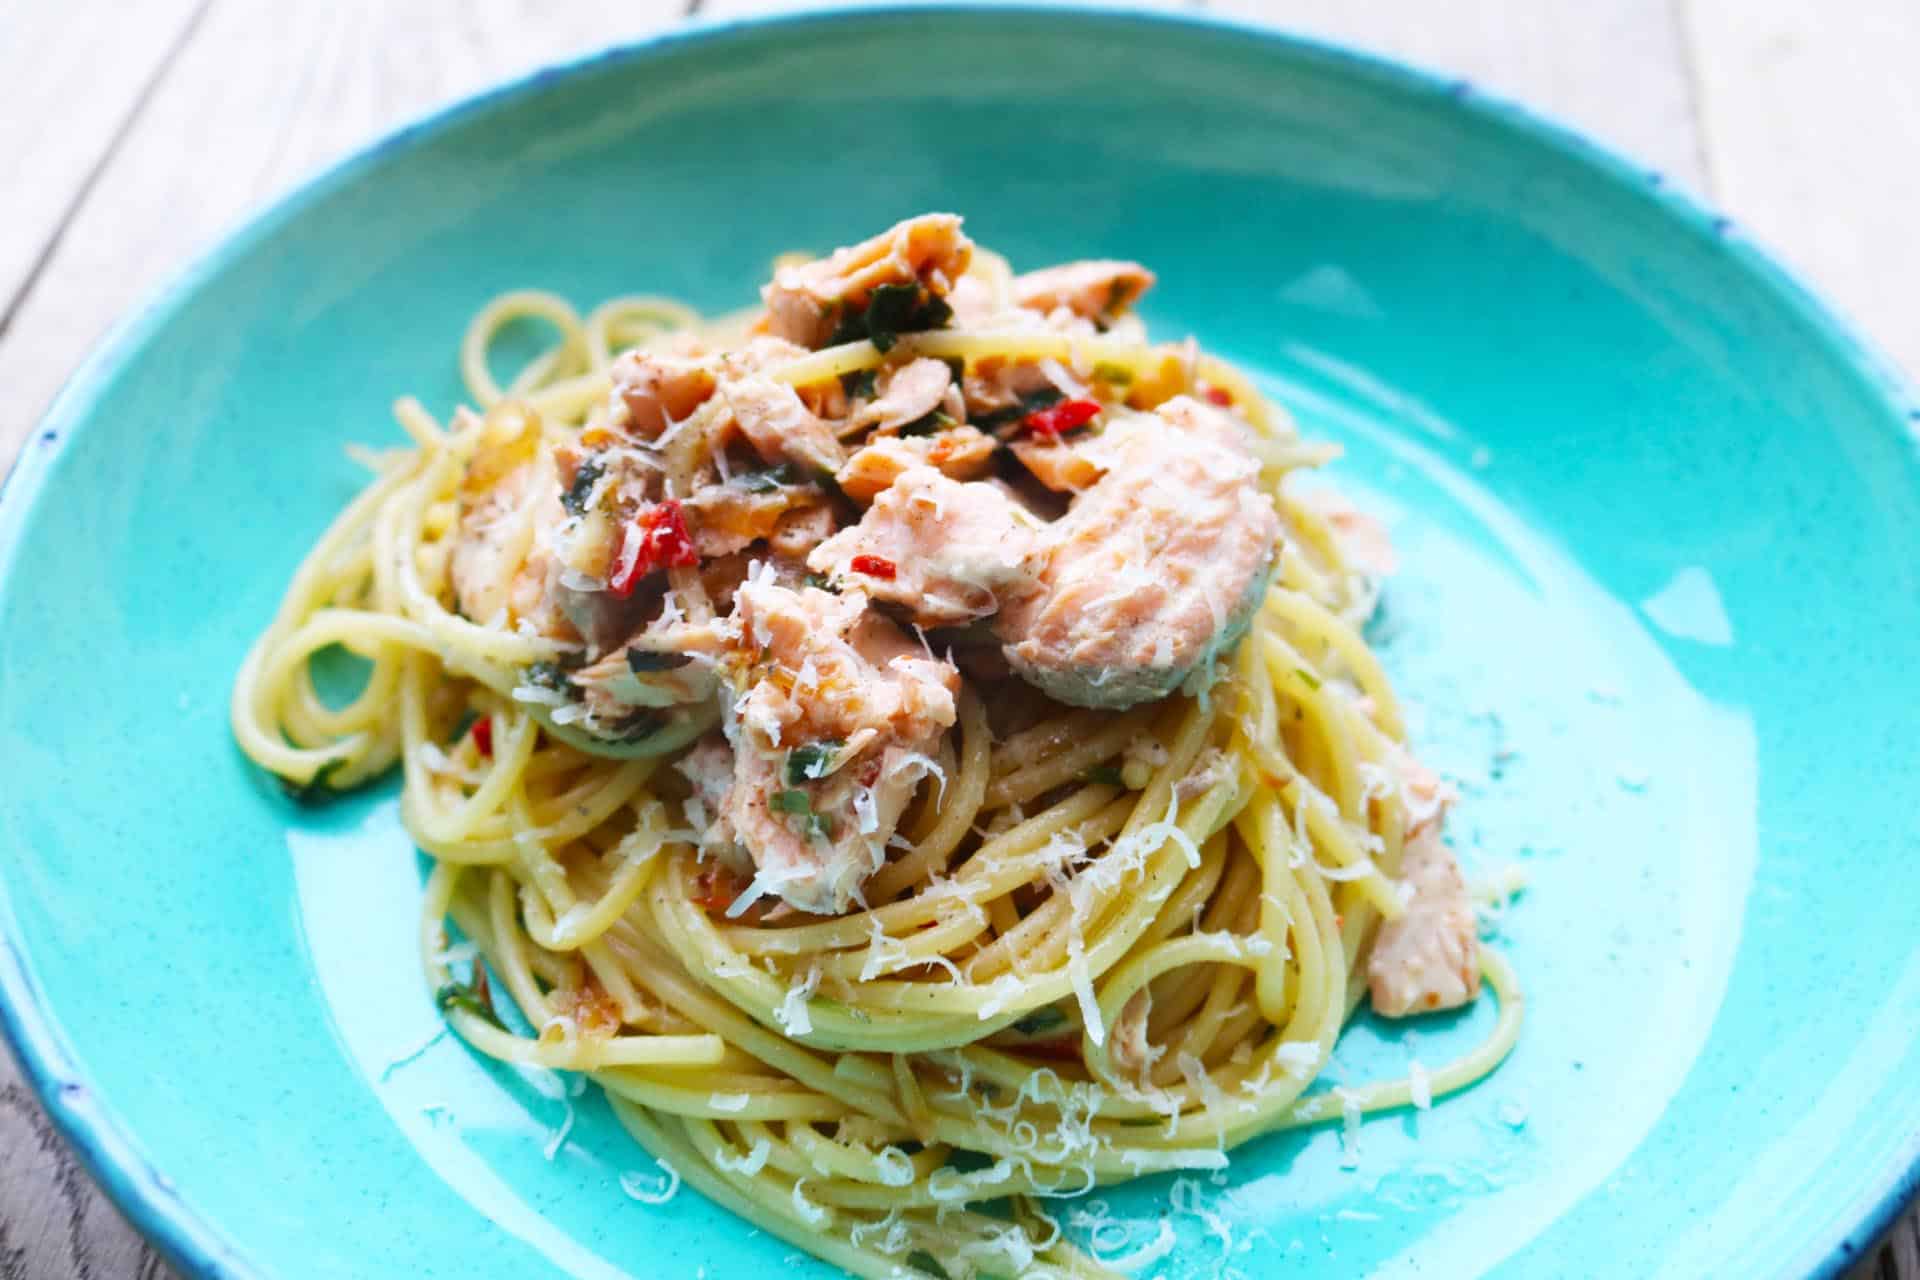 Spaghetti and salmon served in a turquoise blue pasta bowl